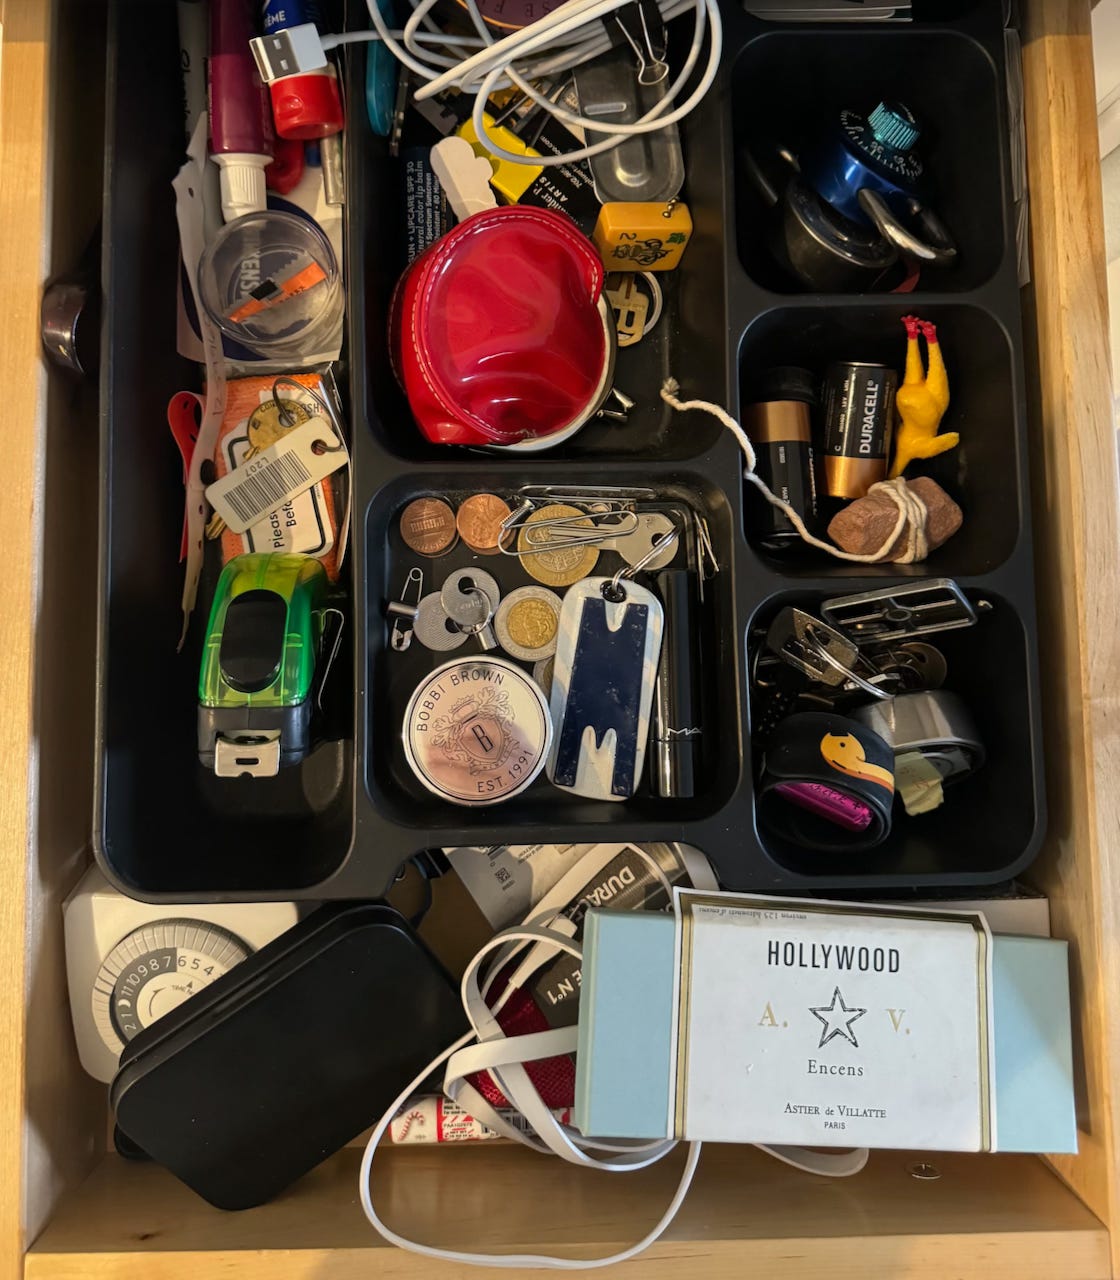 A messy drawer pulled open to reveal its contents.